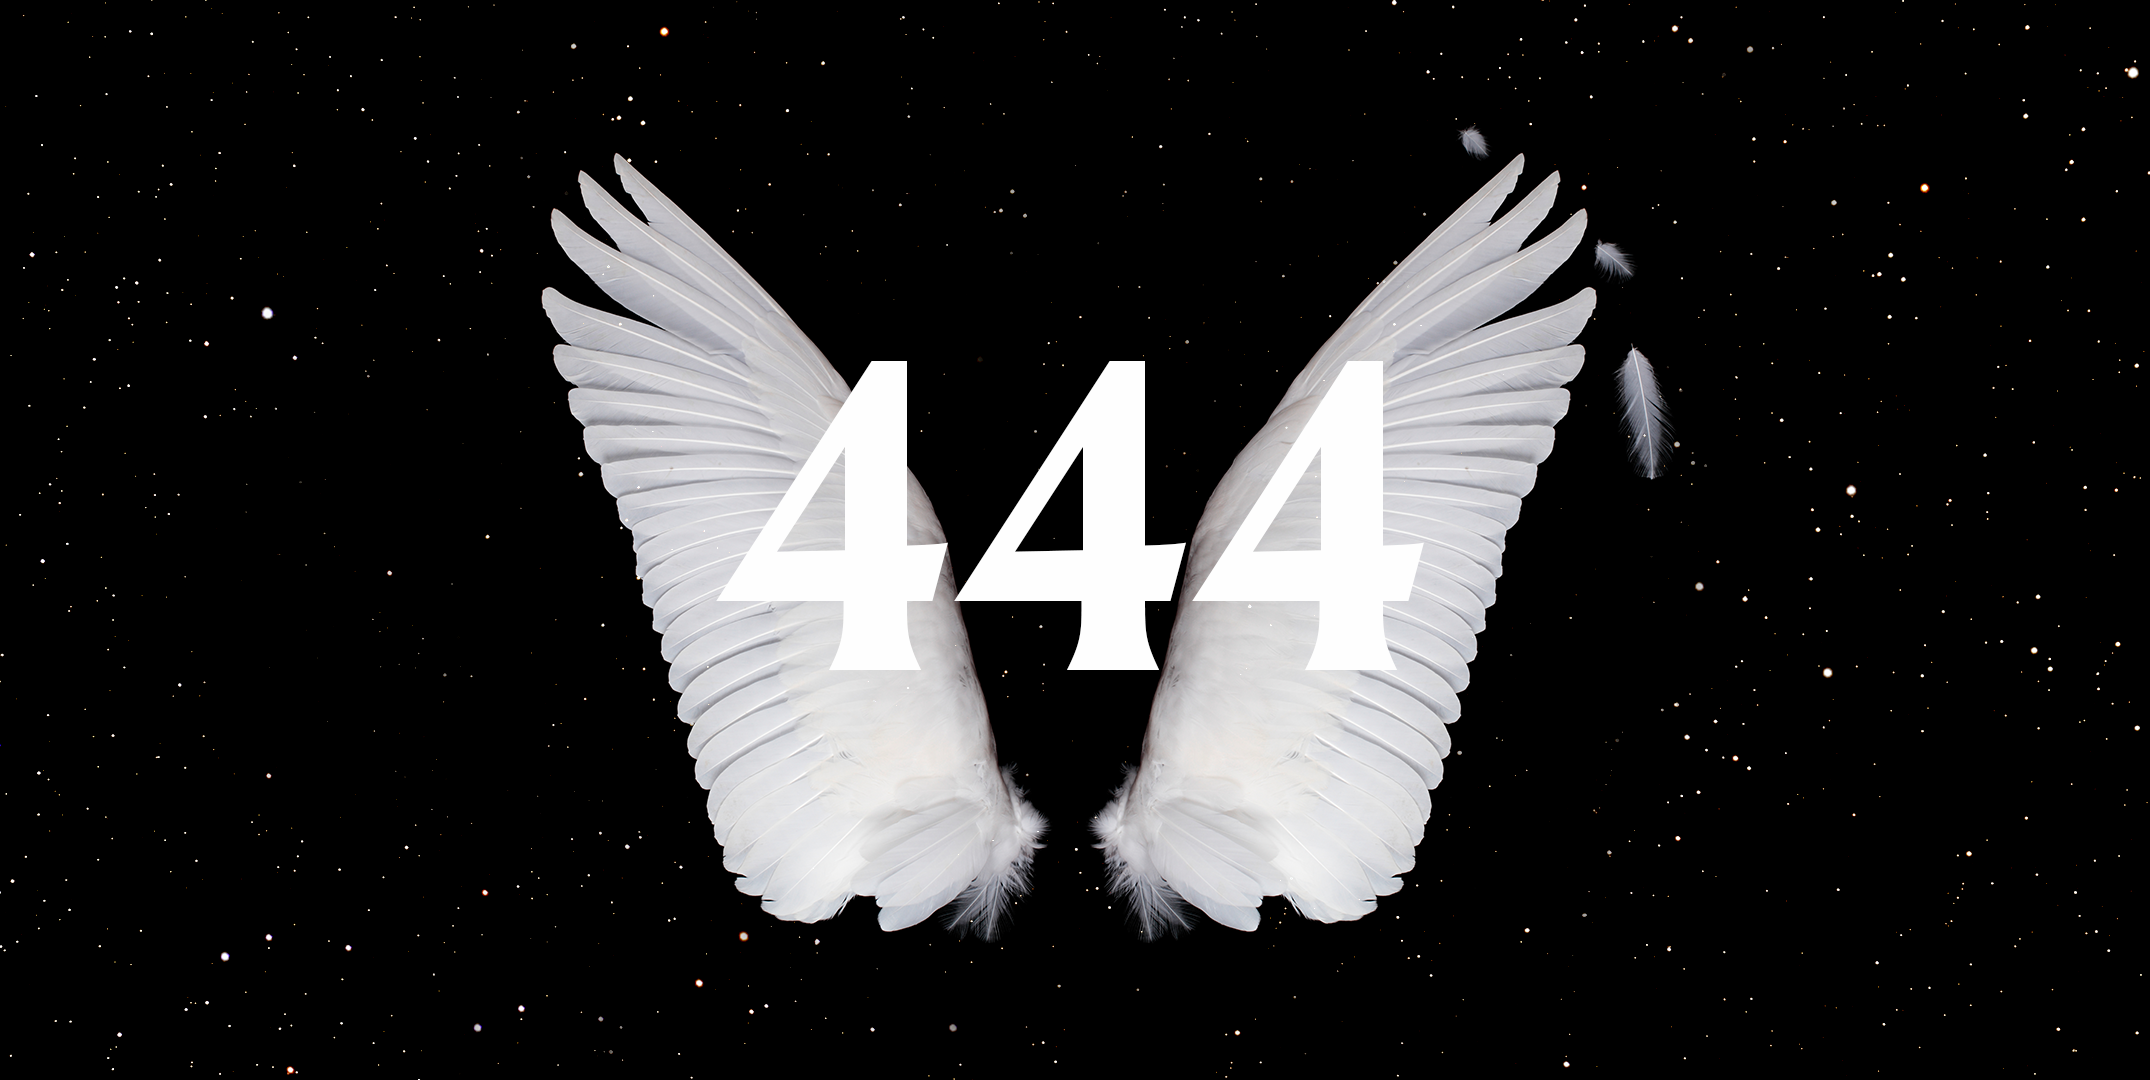 Seeing Angel Number 444 Everywhere? Here's What It Means